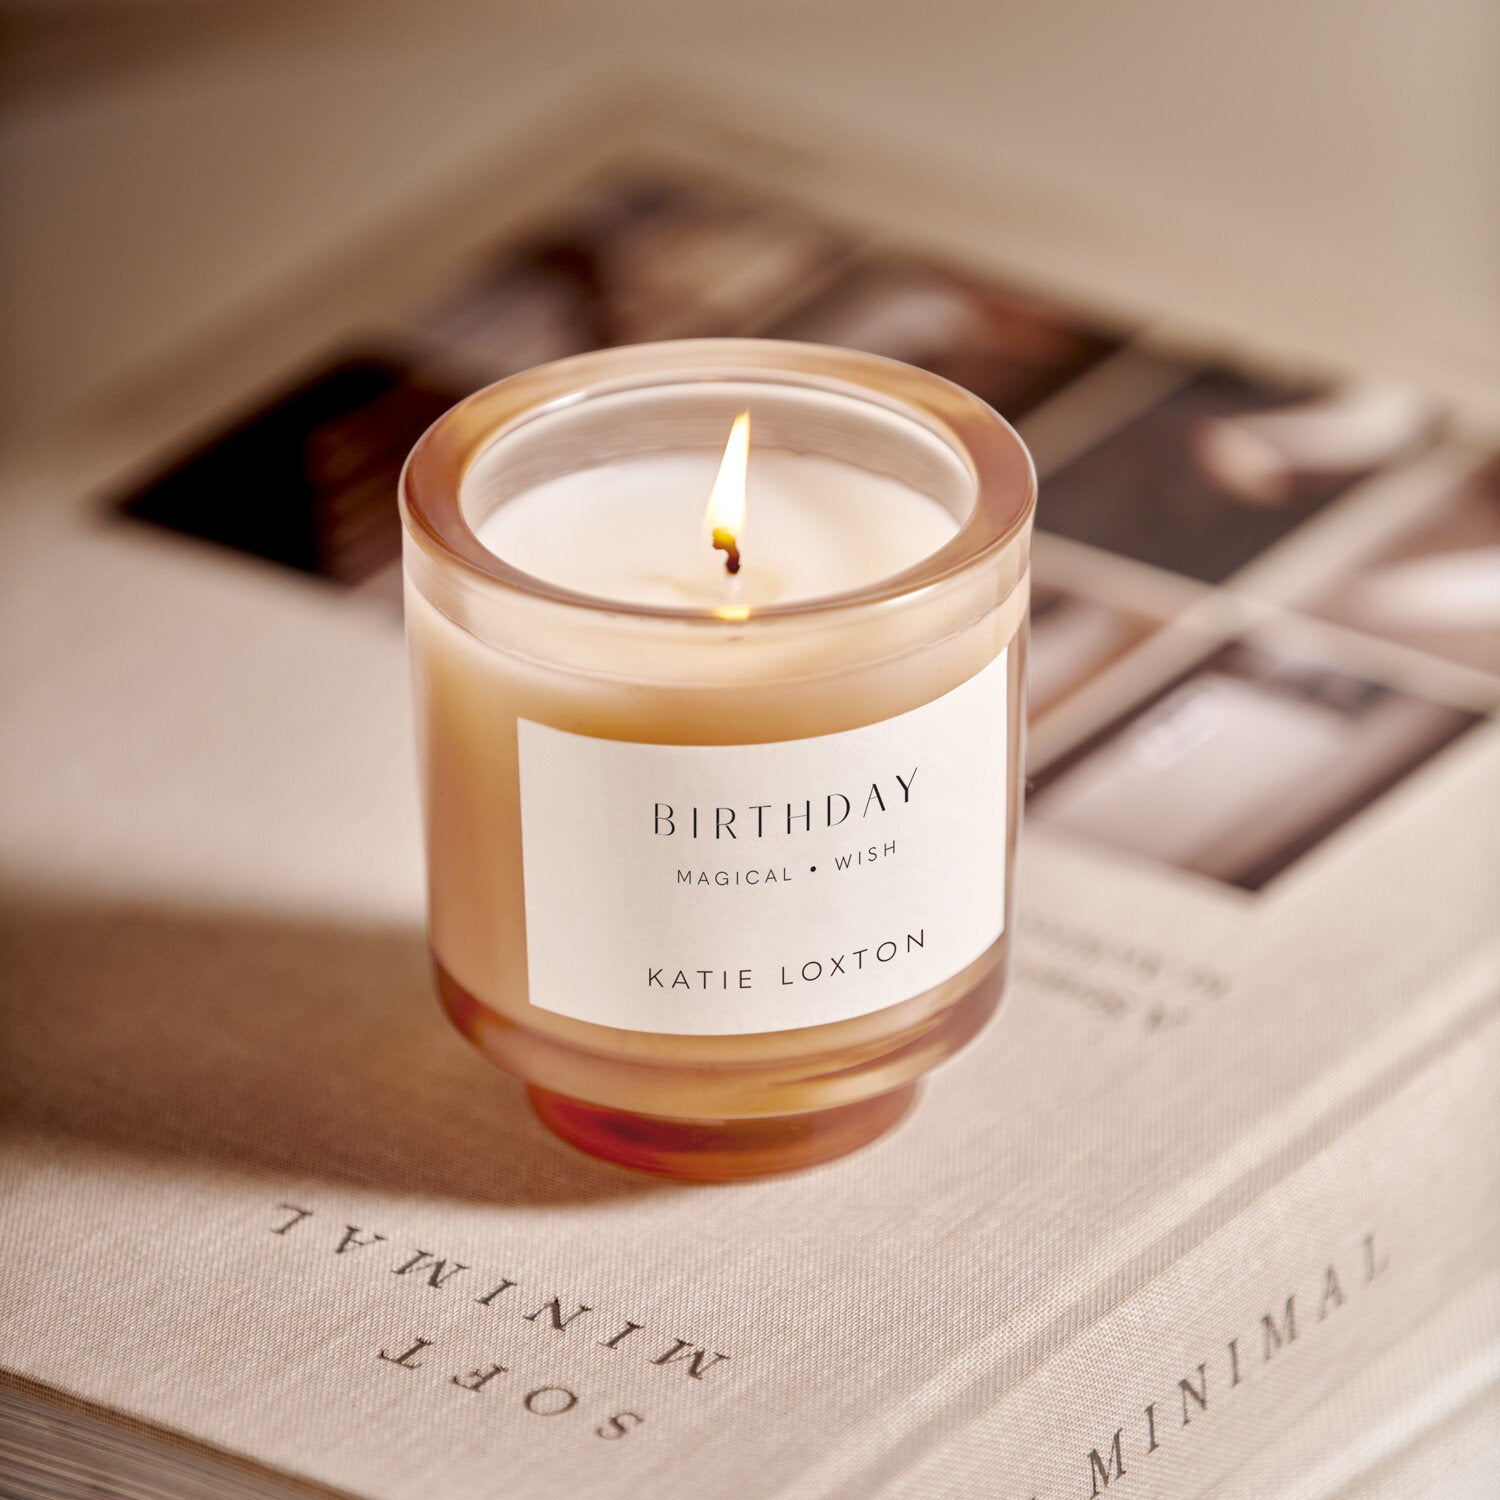 Sentiment Candle 'Birthday' - Katie Loxton